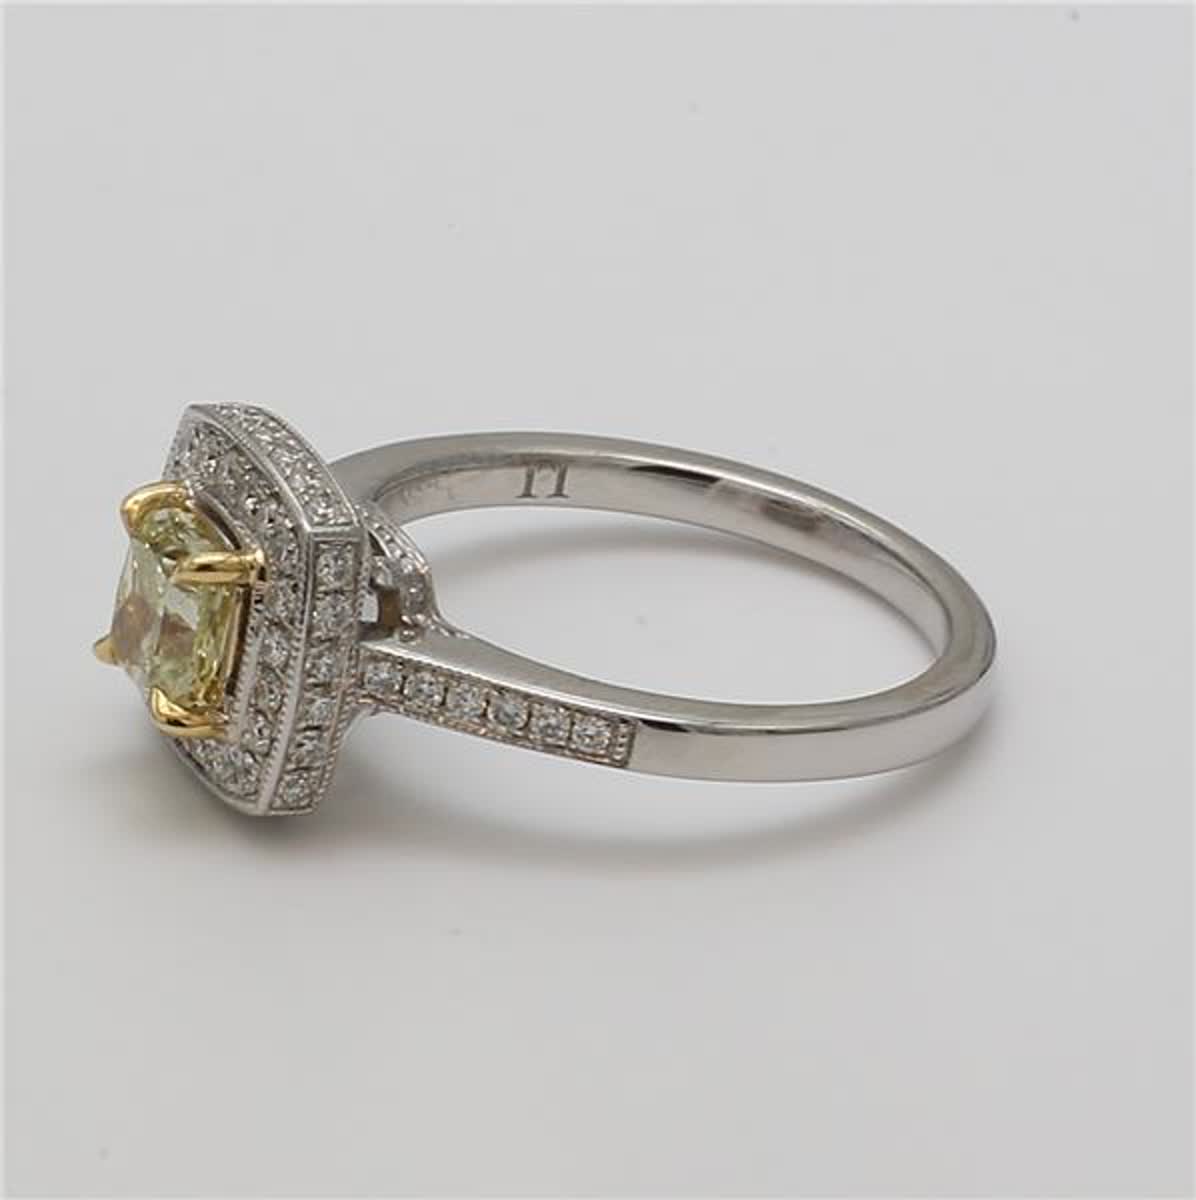 GIA Certified Natural Yellow Cushion and White Diamond 1.15 Carat TW Gold Ring